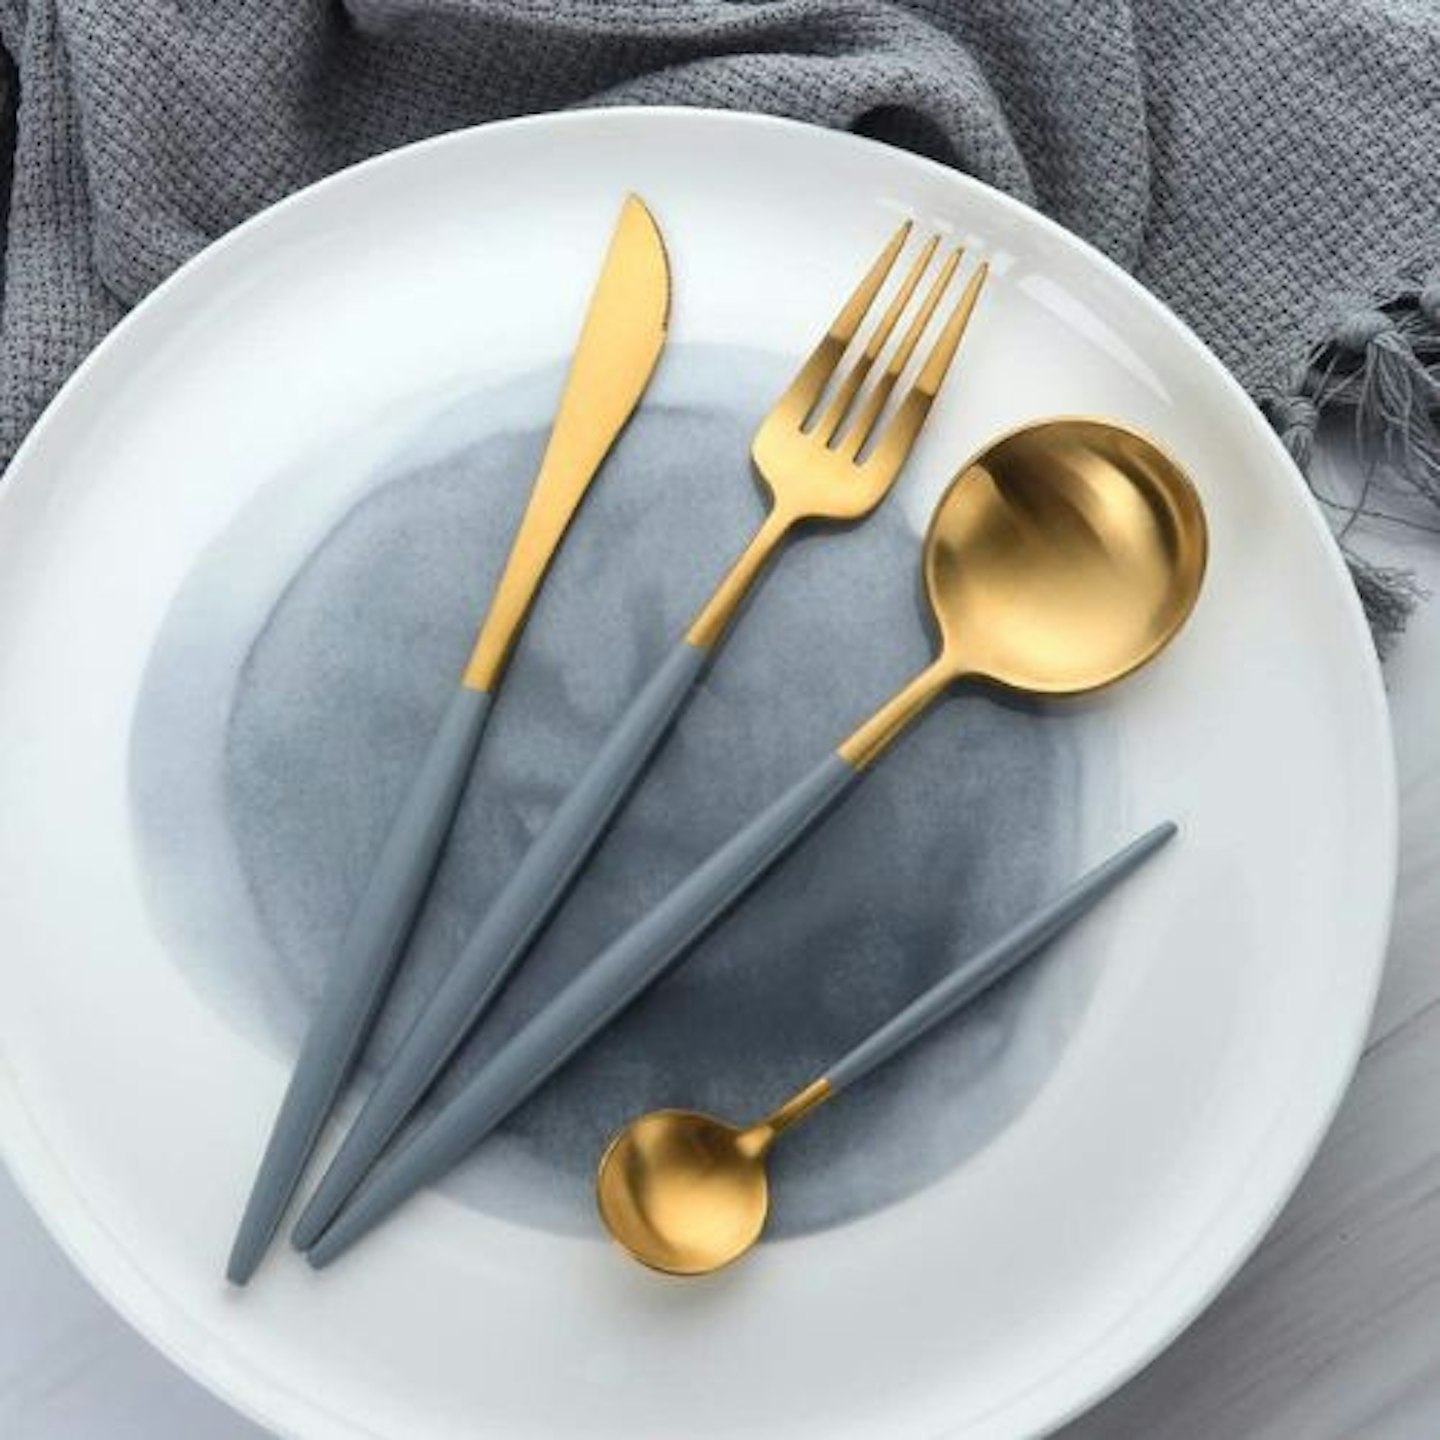 https://images.bauerhosting.com/affiliates/sites/10/2022/11/Buyer-Star-4-Piece-Luxury-Gold-Cutlery-Set-with-Gray-Handle.jpg?auto=format&w=1440&q=80